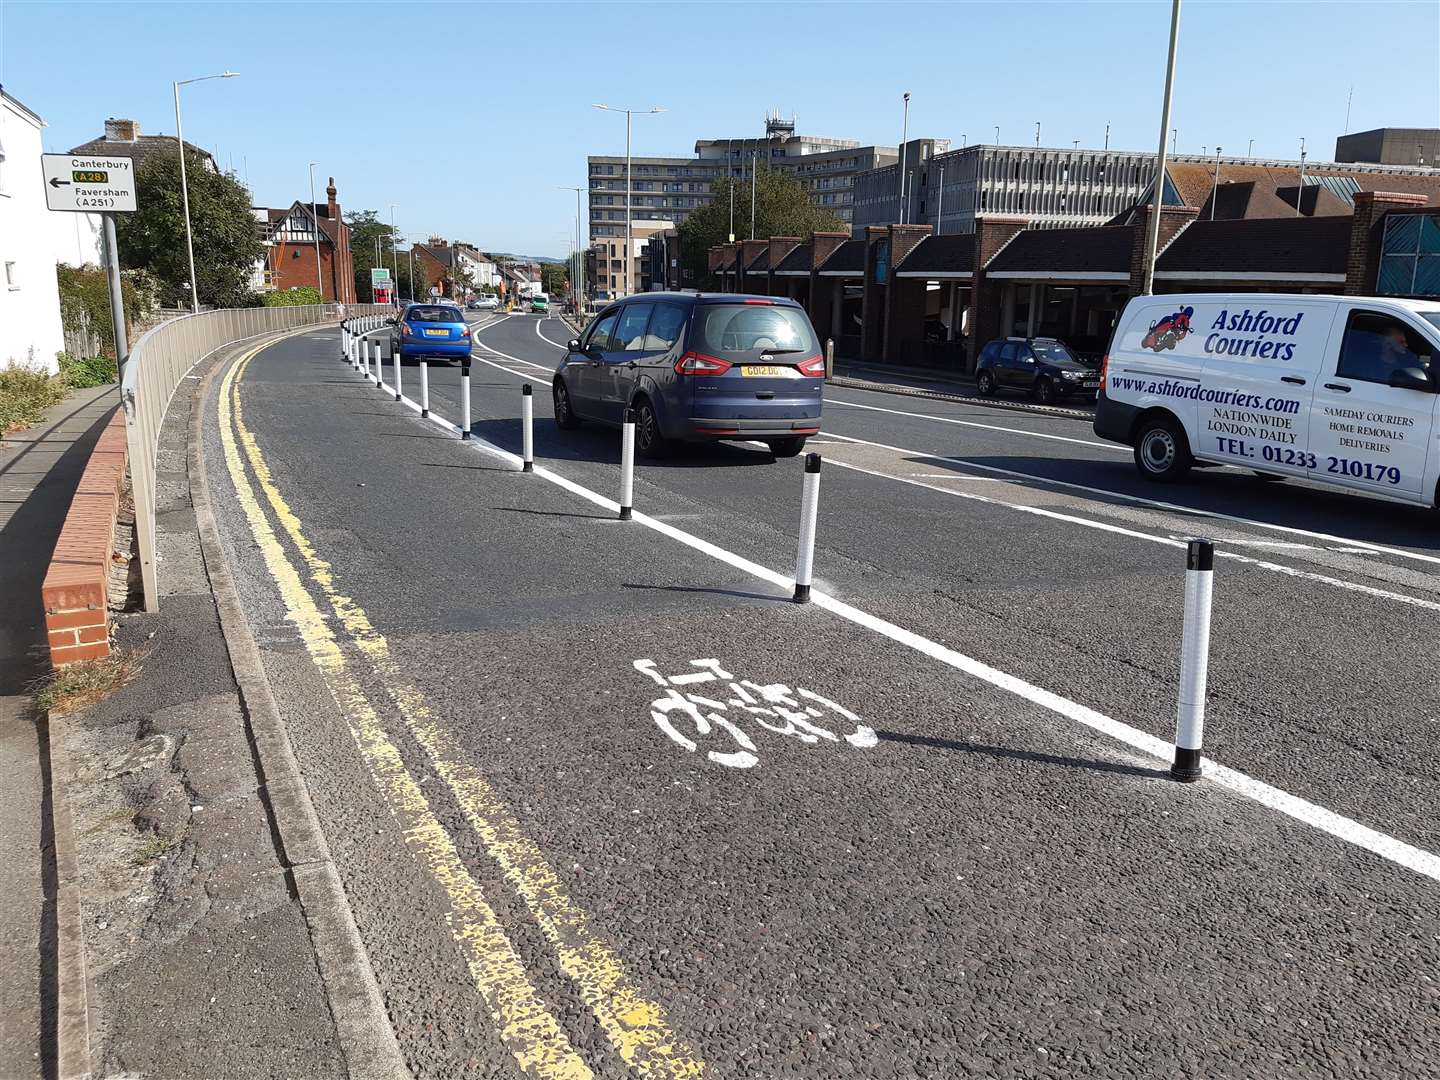 A pop-up cycle lane in Ashford town centre proved controversial